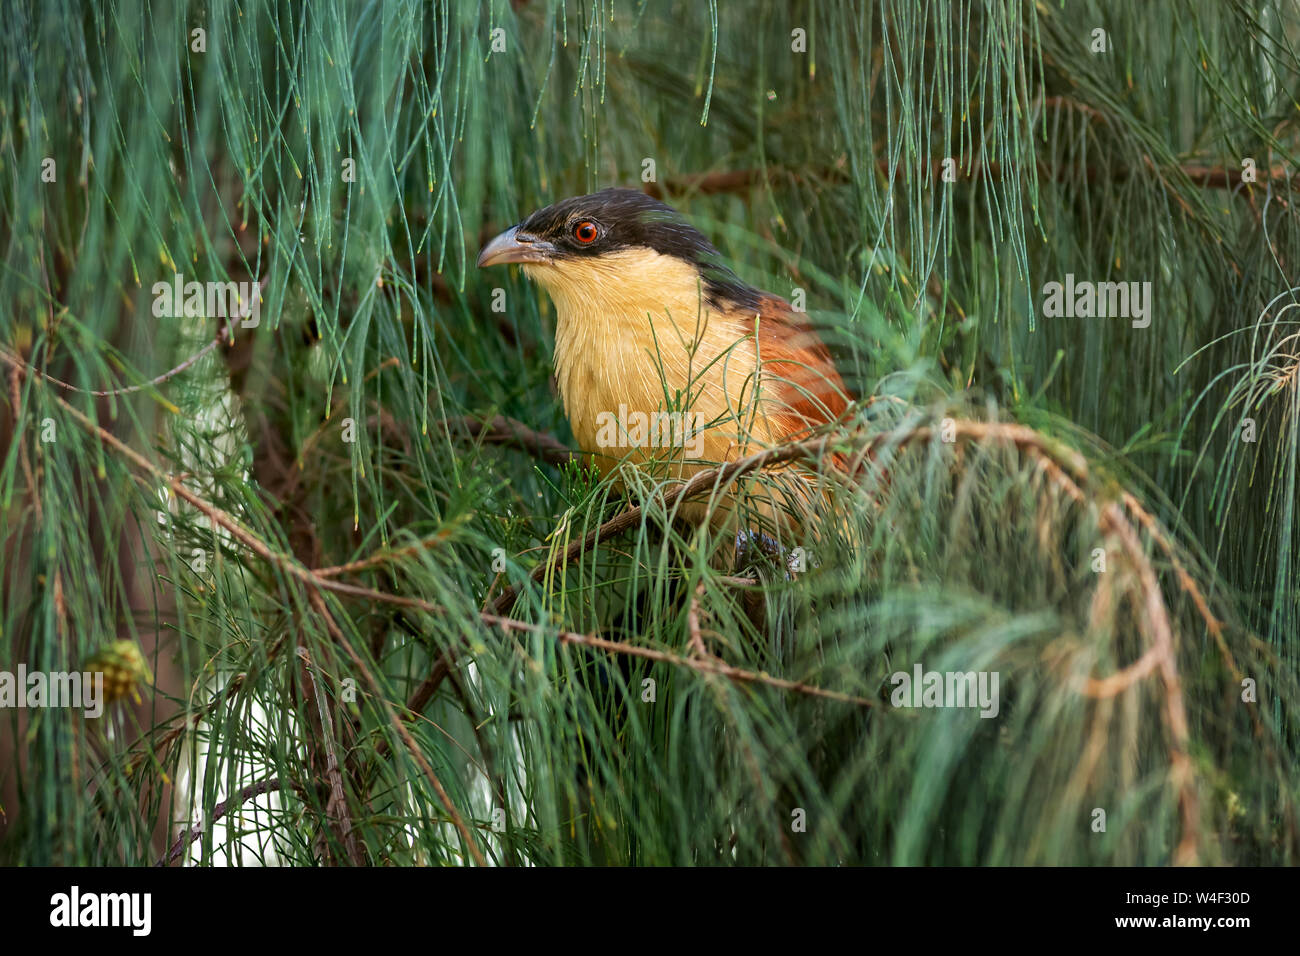 Senegal Coucal - Centropus senegalensis, beautiful colored cuckoo from African bushes and forests, La Somone, Senegal. Stock Photo